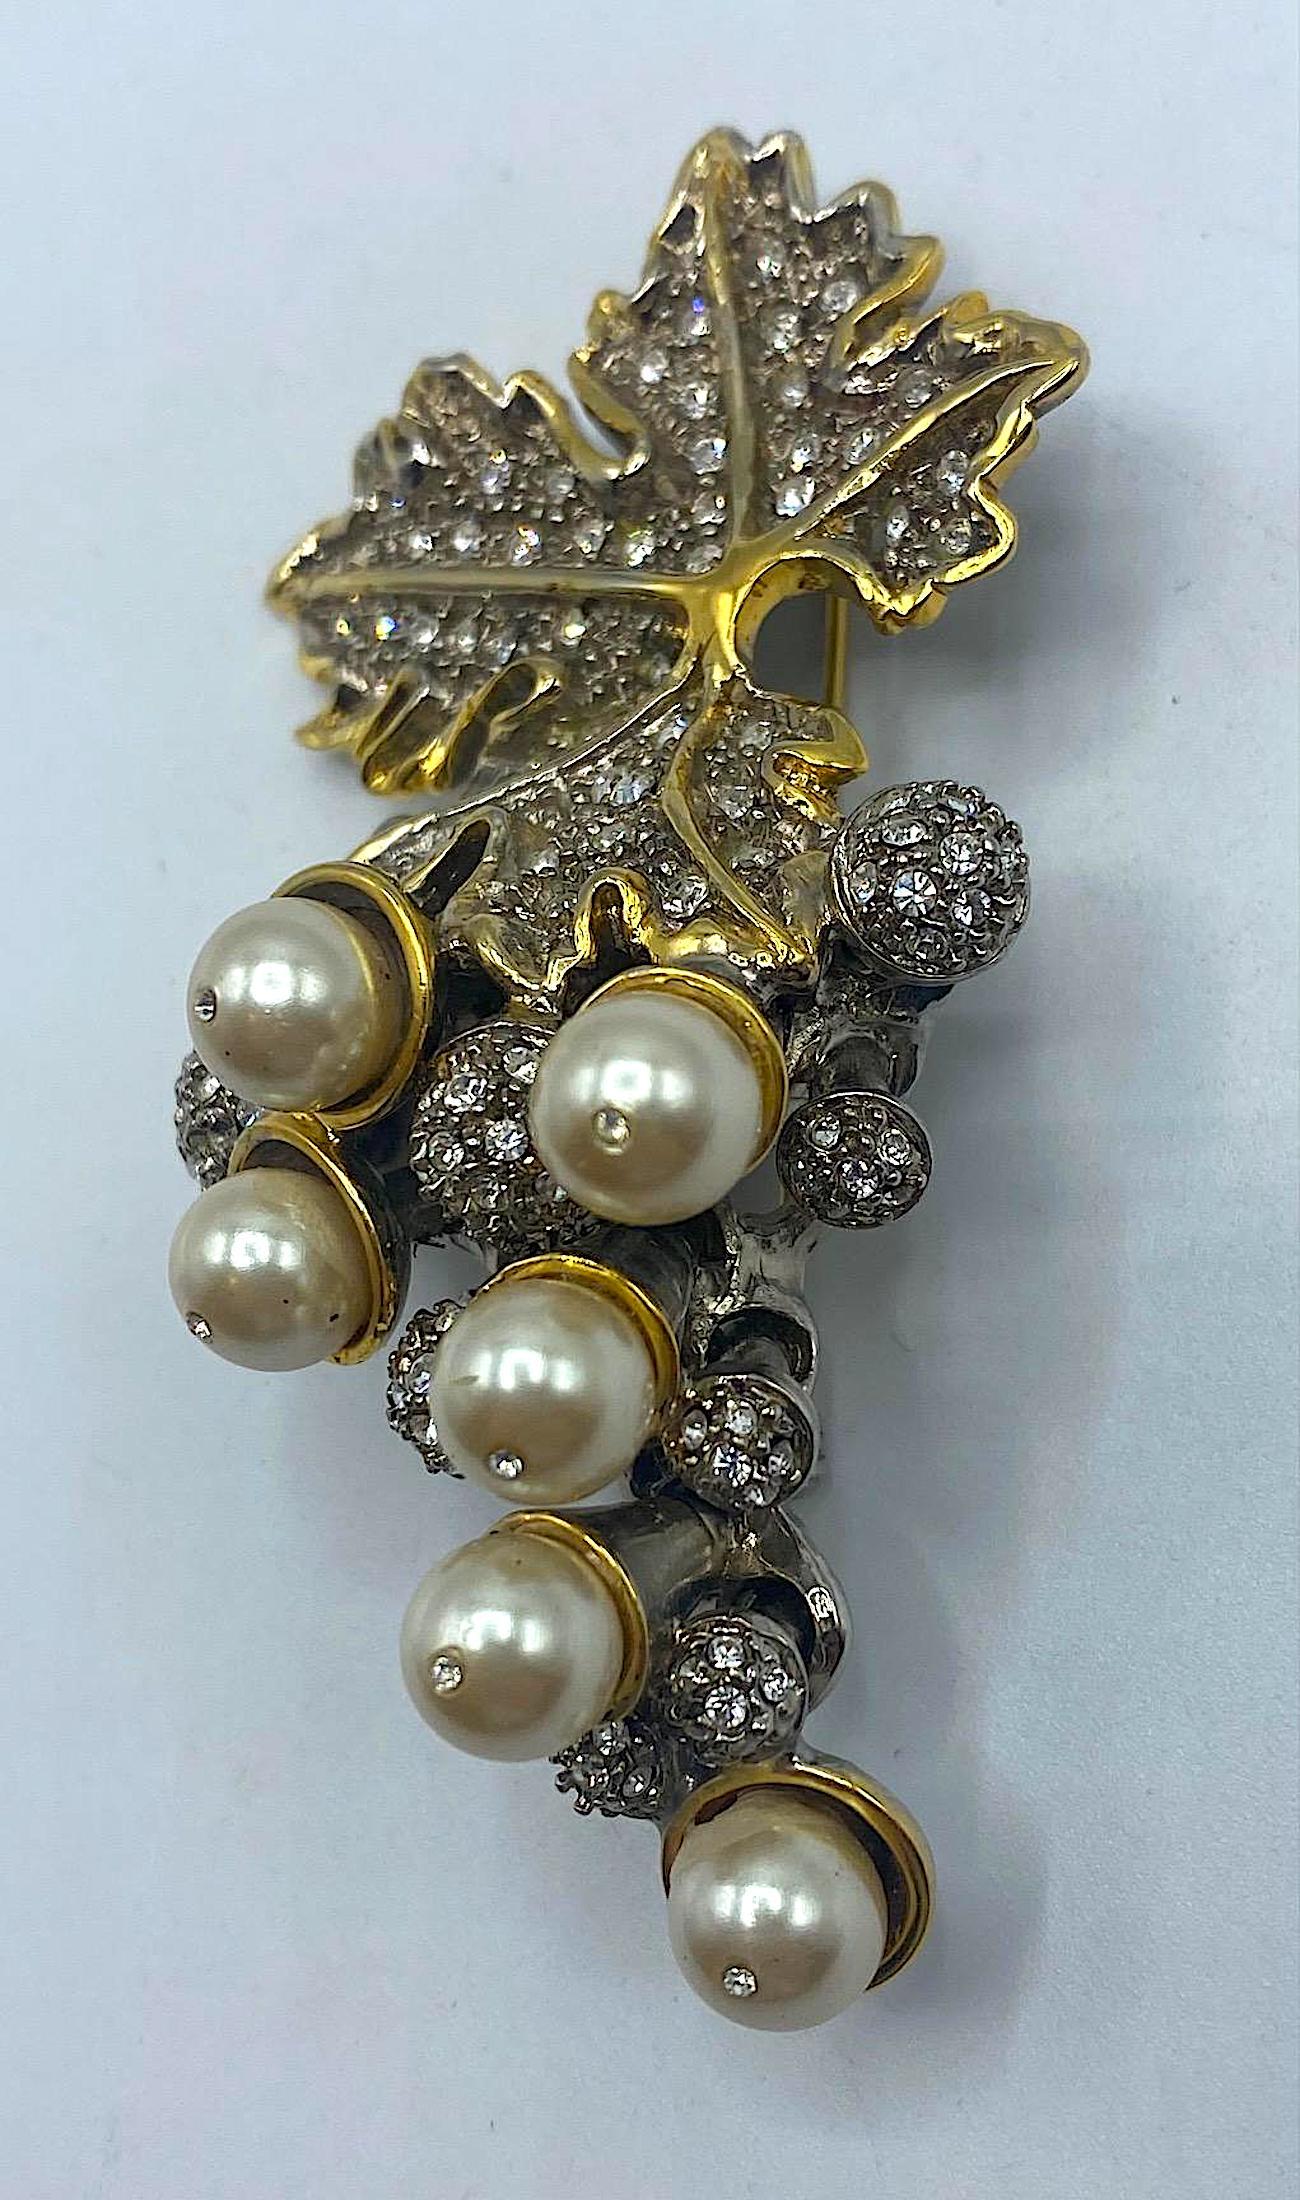 A beautifully made grape cluster brooch in faux pearl and pave' rhinestone by Italian fashion jewelry designer Gianni De Liguoro. The setting is meticulously designed and crafted to create a three dimensional design. The main part of the brooch is